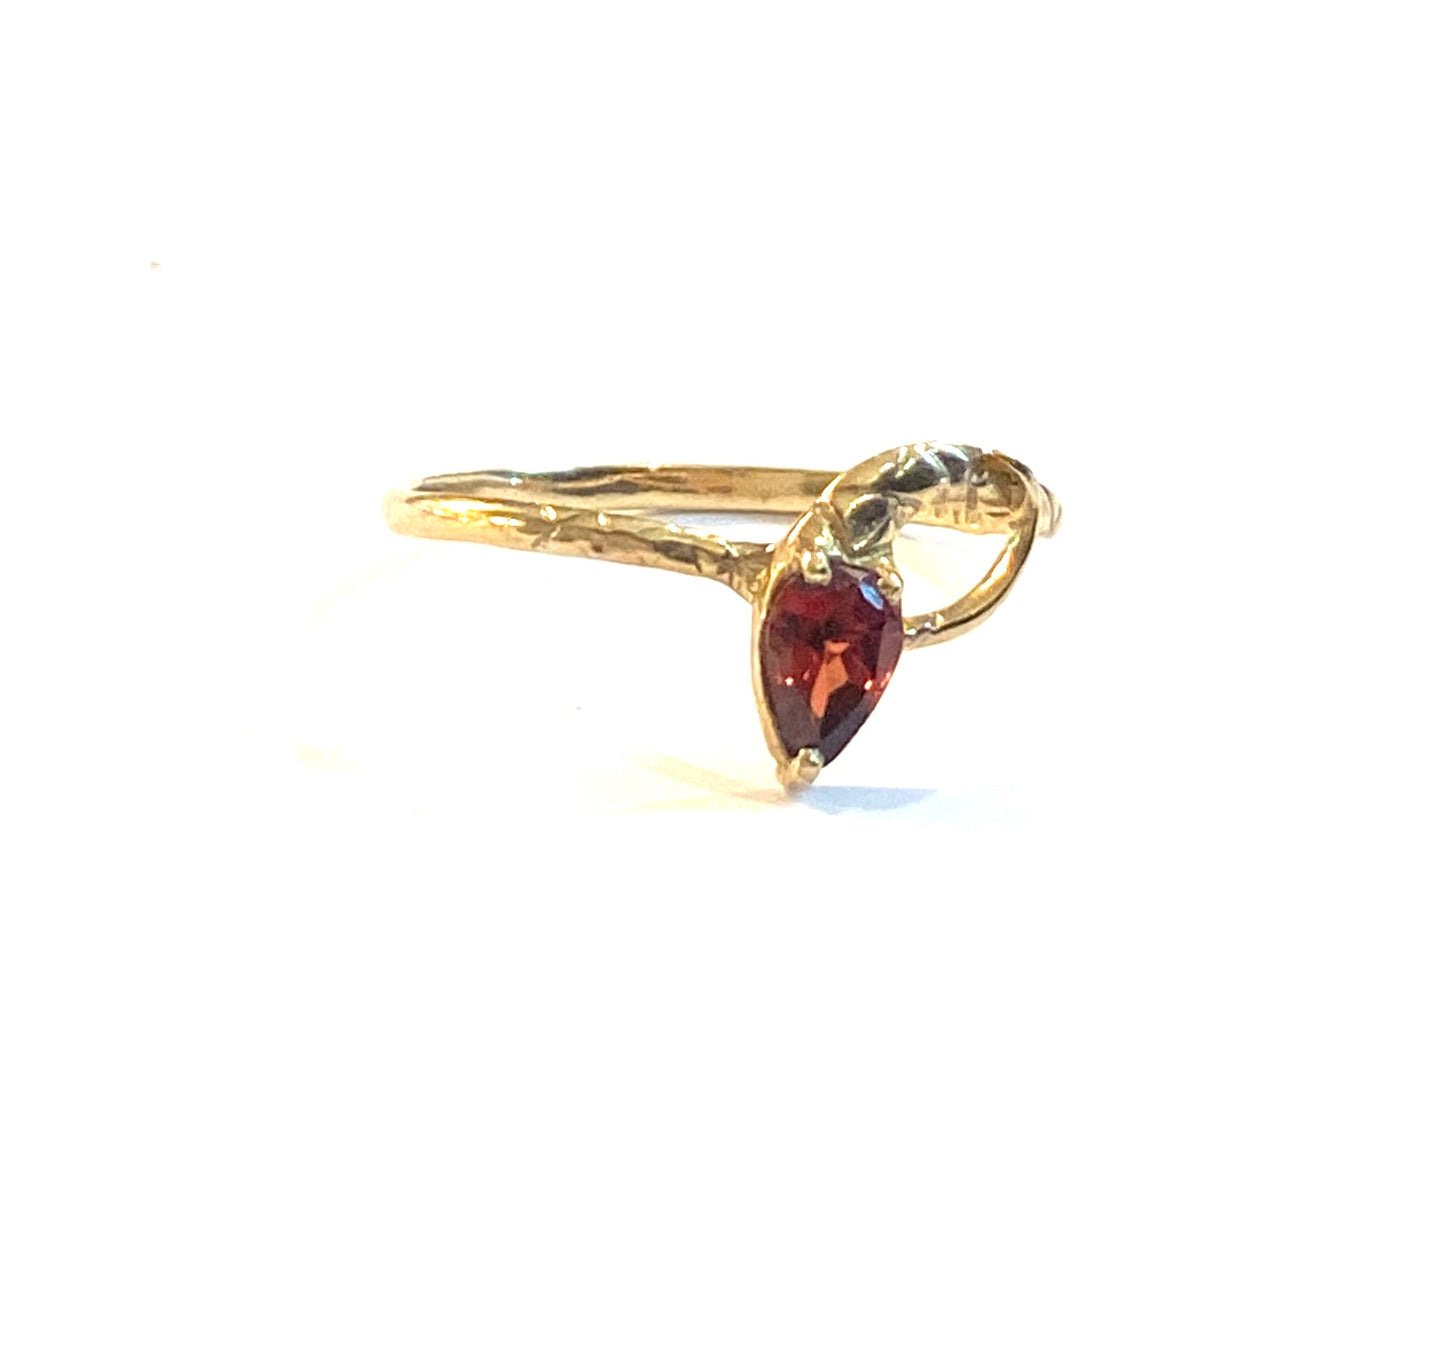 9ct 375 vintage gold snake ring with garnet head ring size O